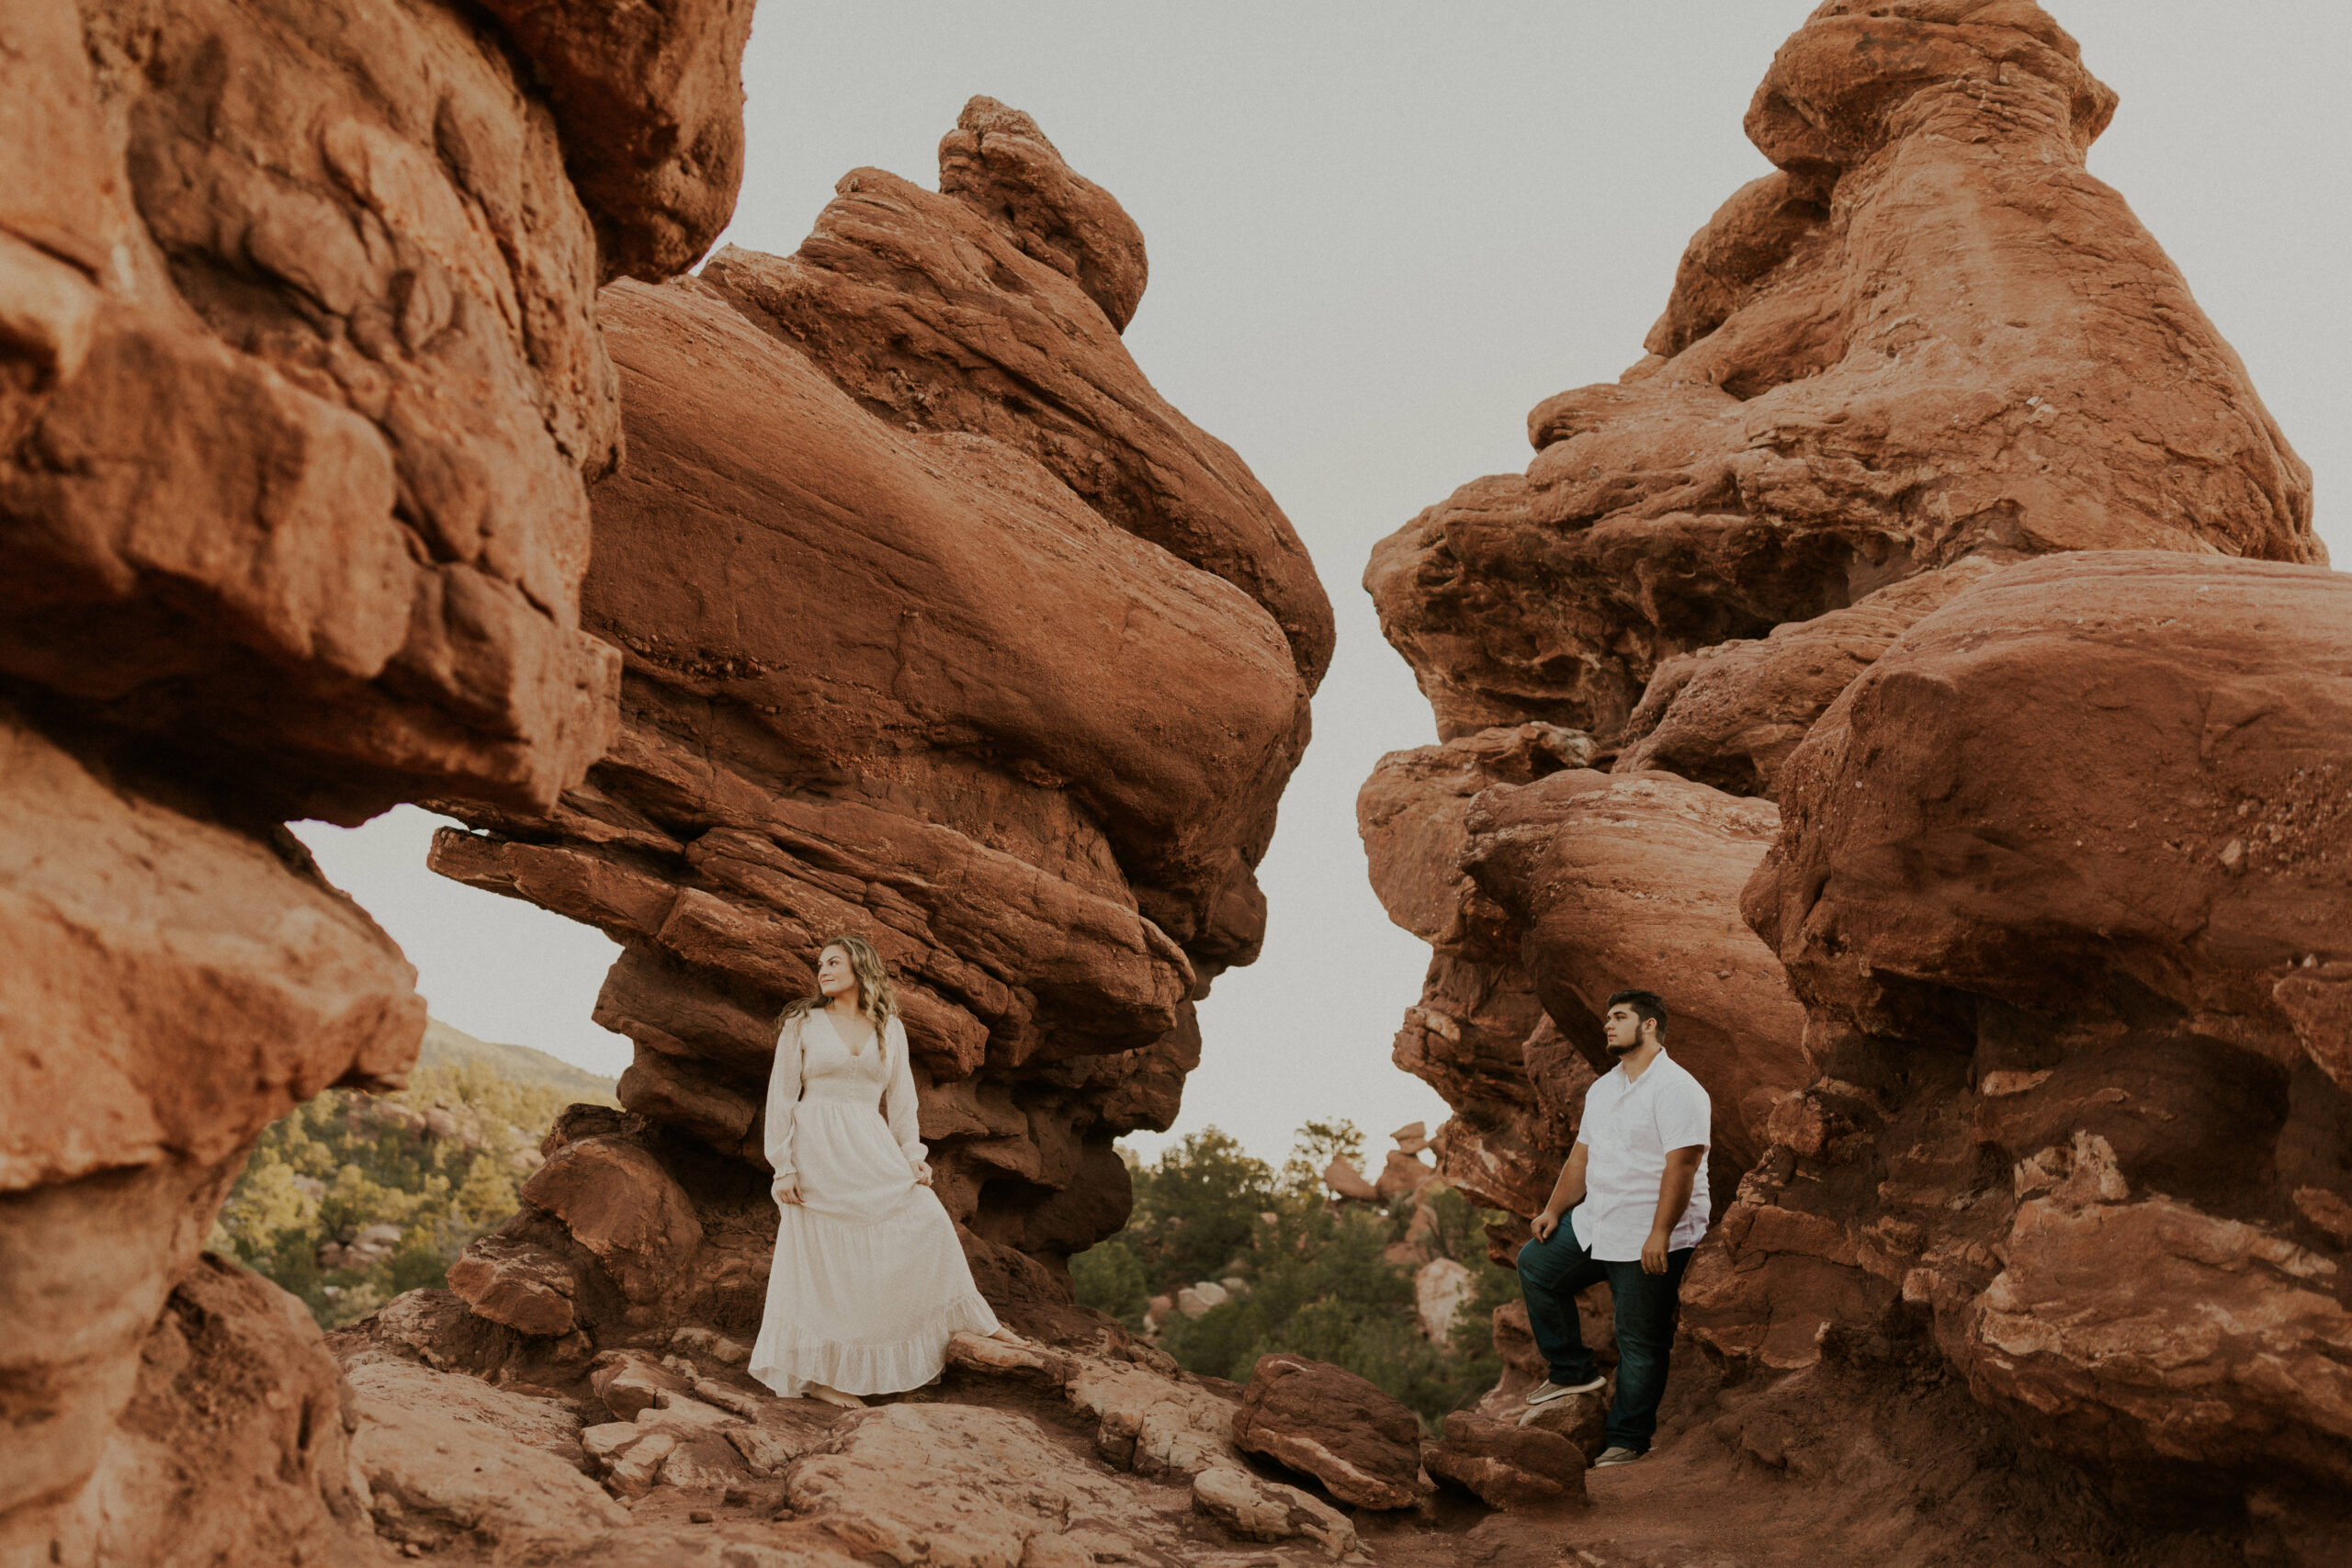 Ryan surprised Selina in the sweetest way ever by booking an engagement session at Garden of the Gods just after she said yes!